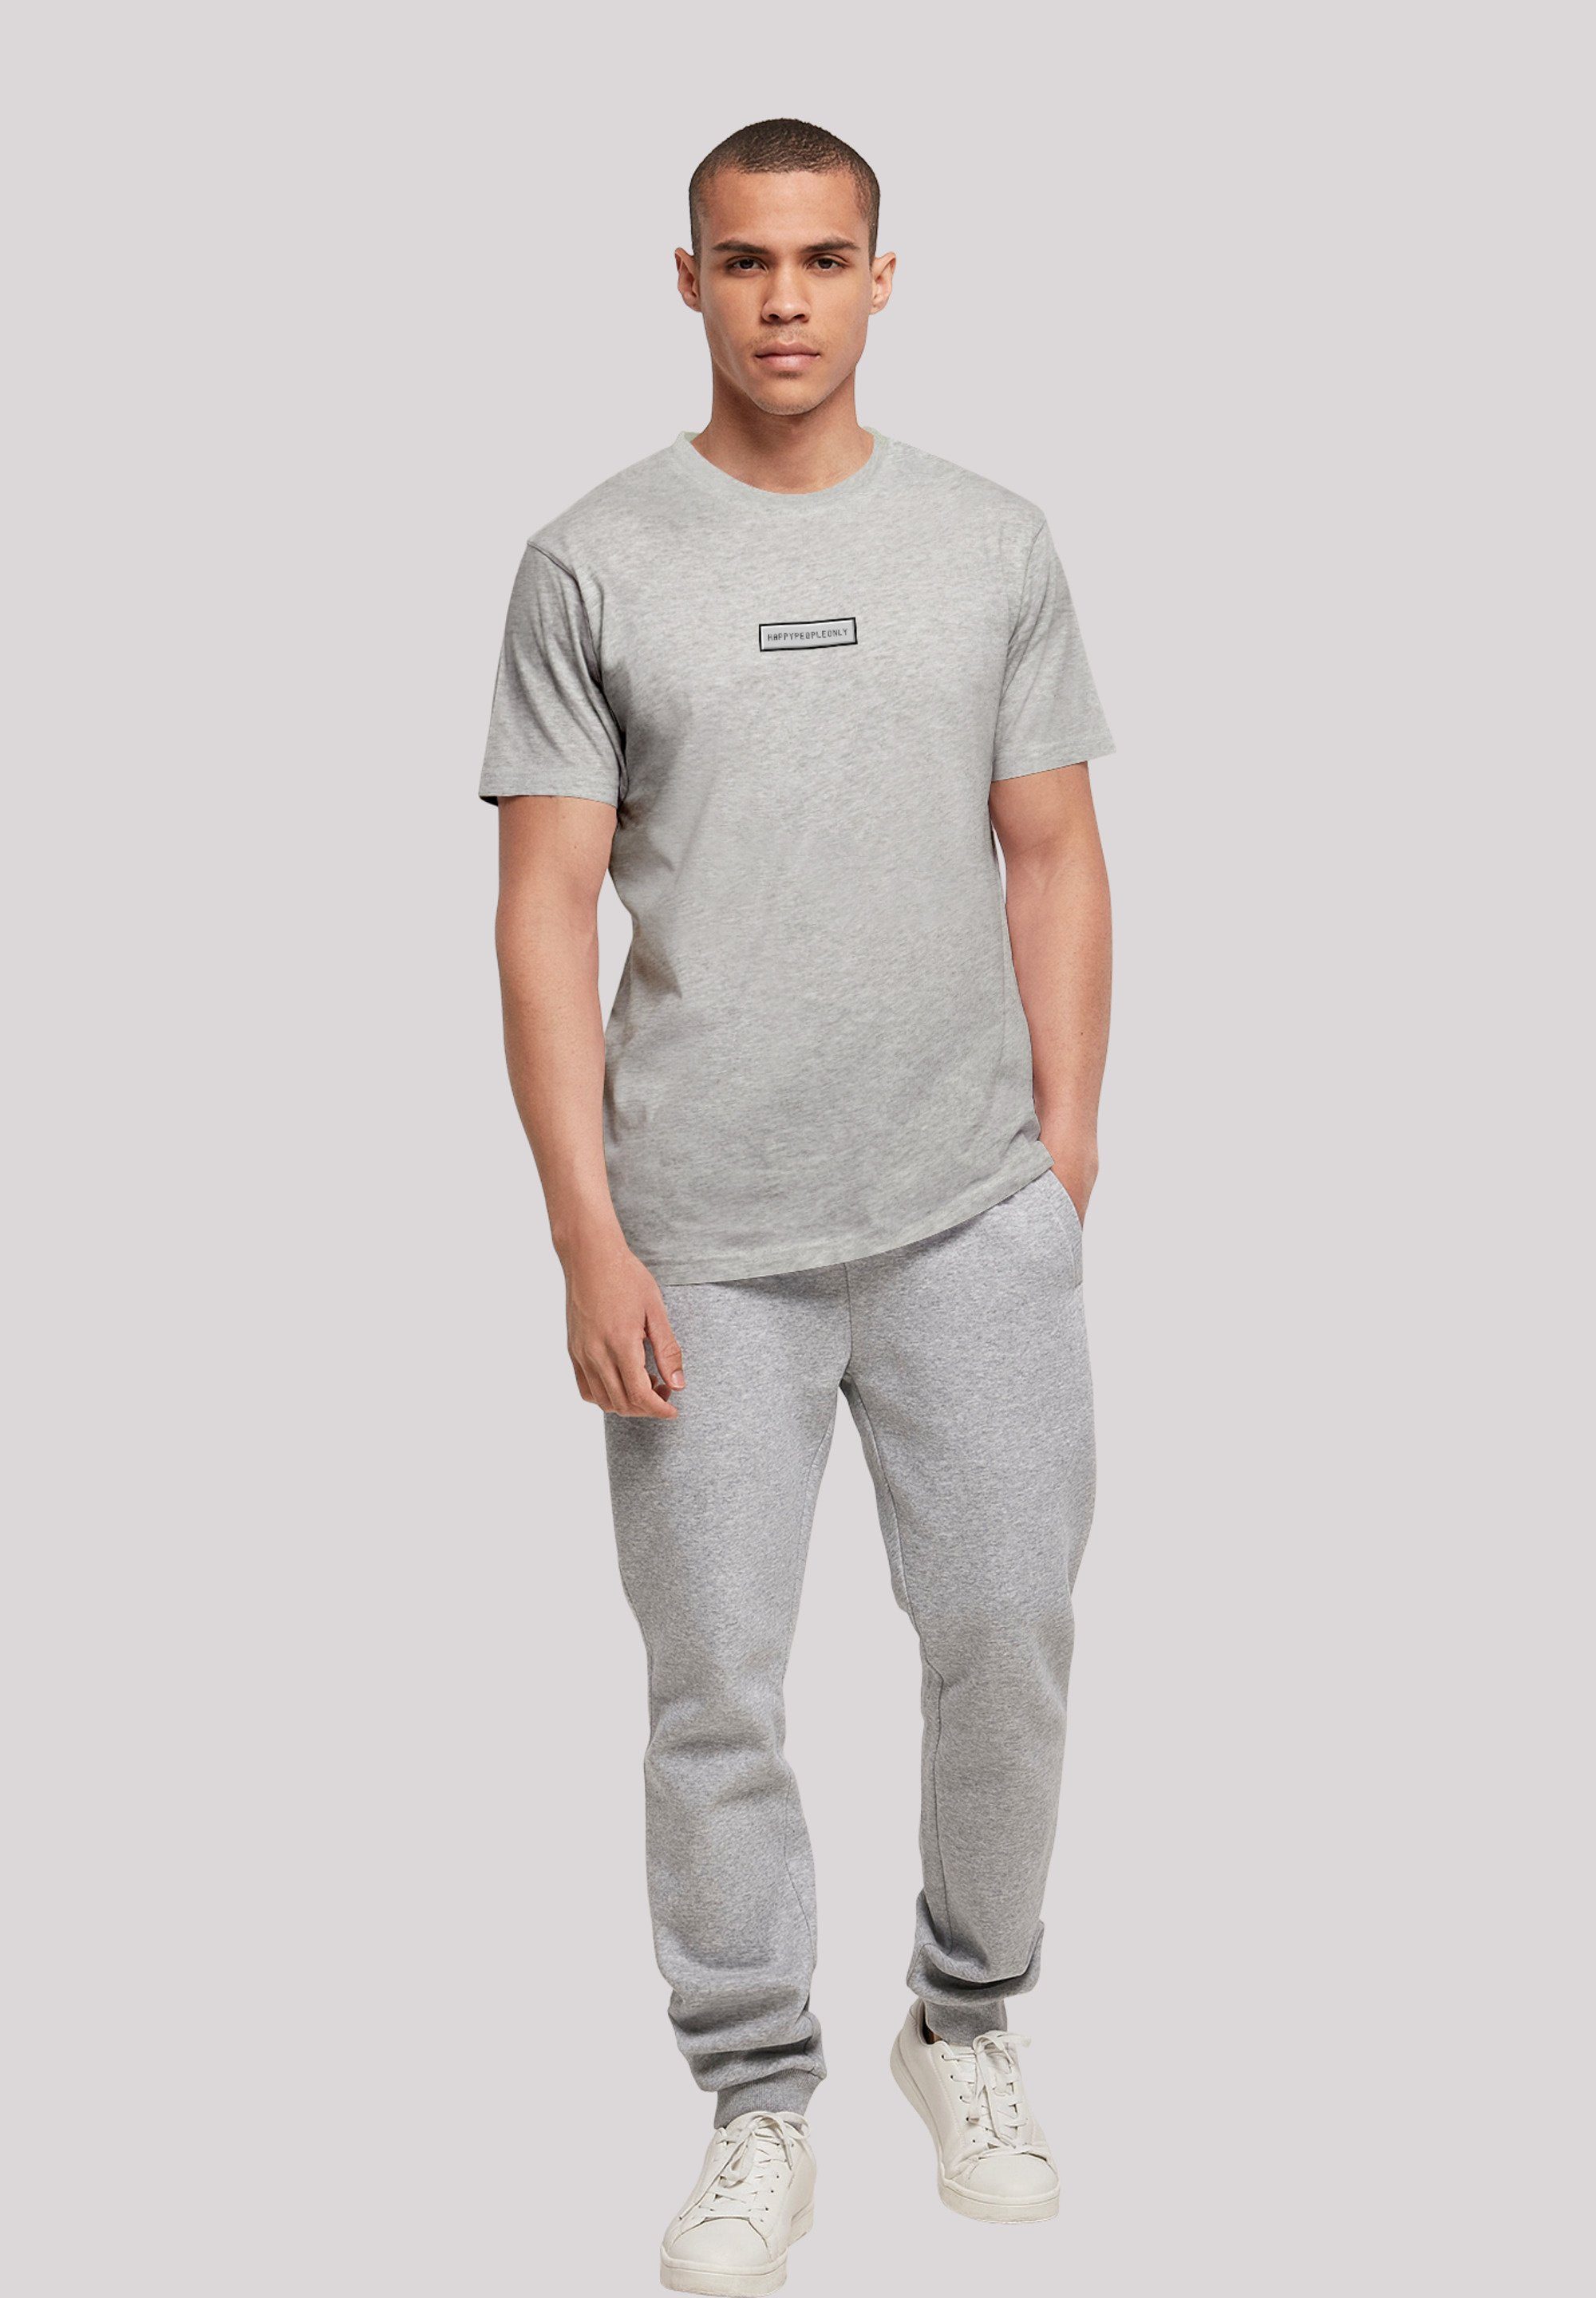 F4NT4STIC T-Shirt Happy grey Only heather Good Print Vibes People